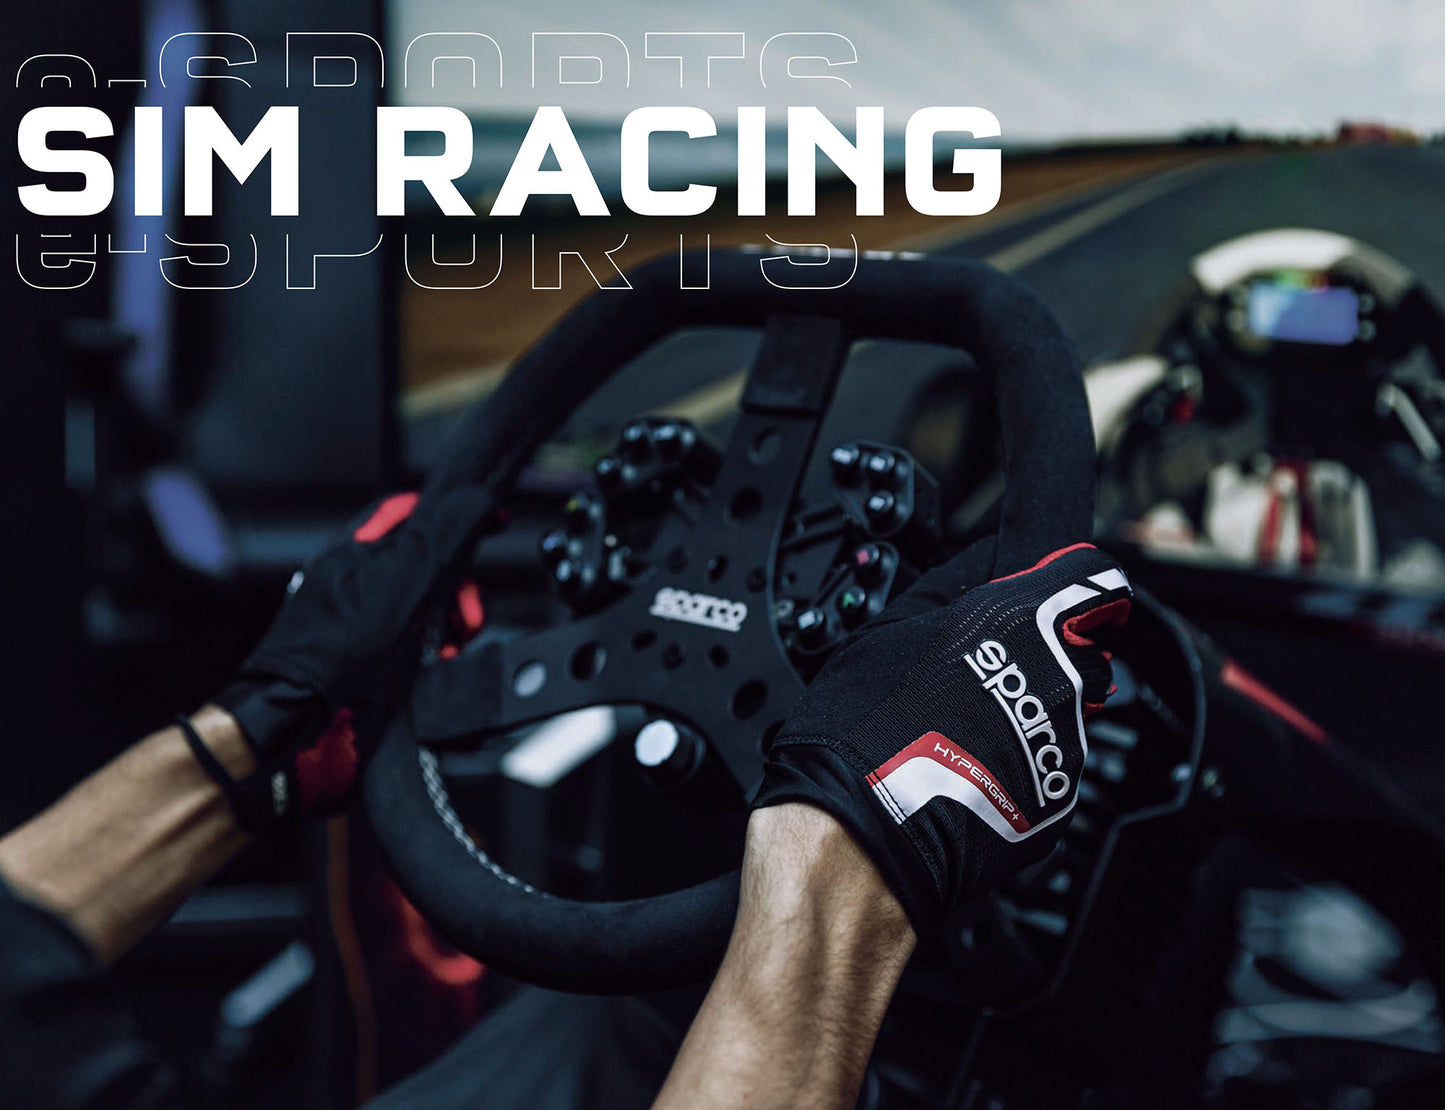 Sparco Gaming EVOLVE GT-R PRO Racing Sim Chassis Frame & Circuit Seat E-Sports